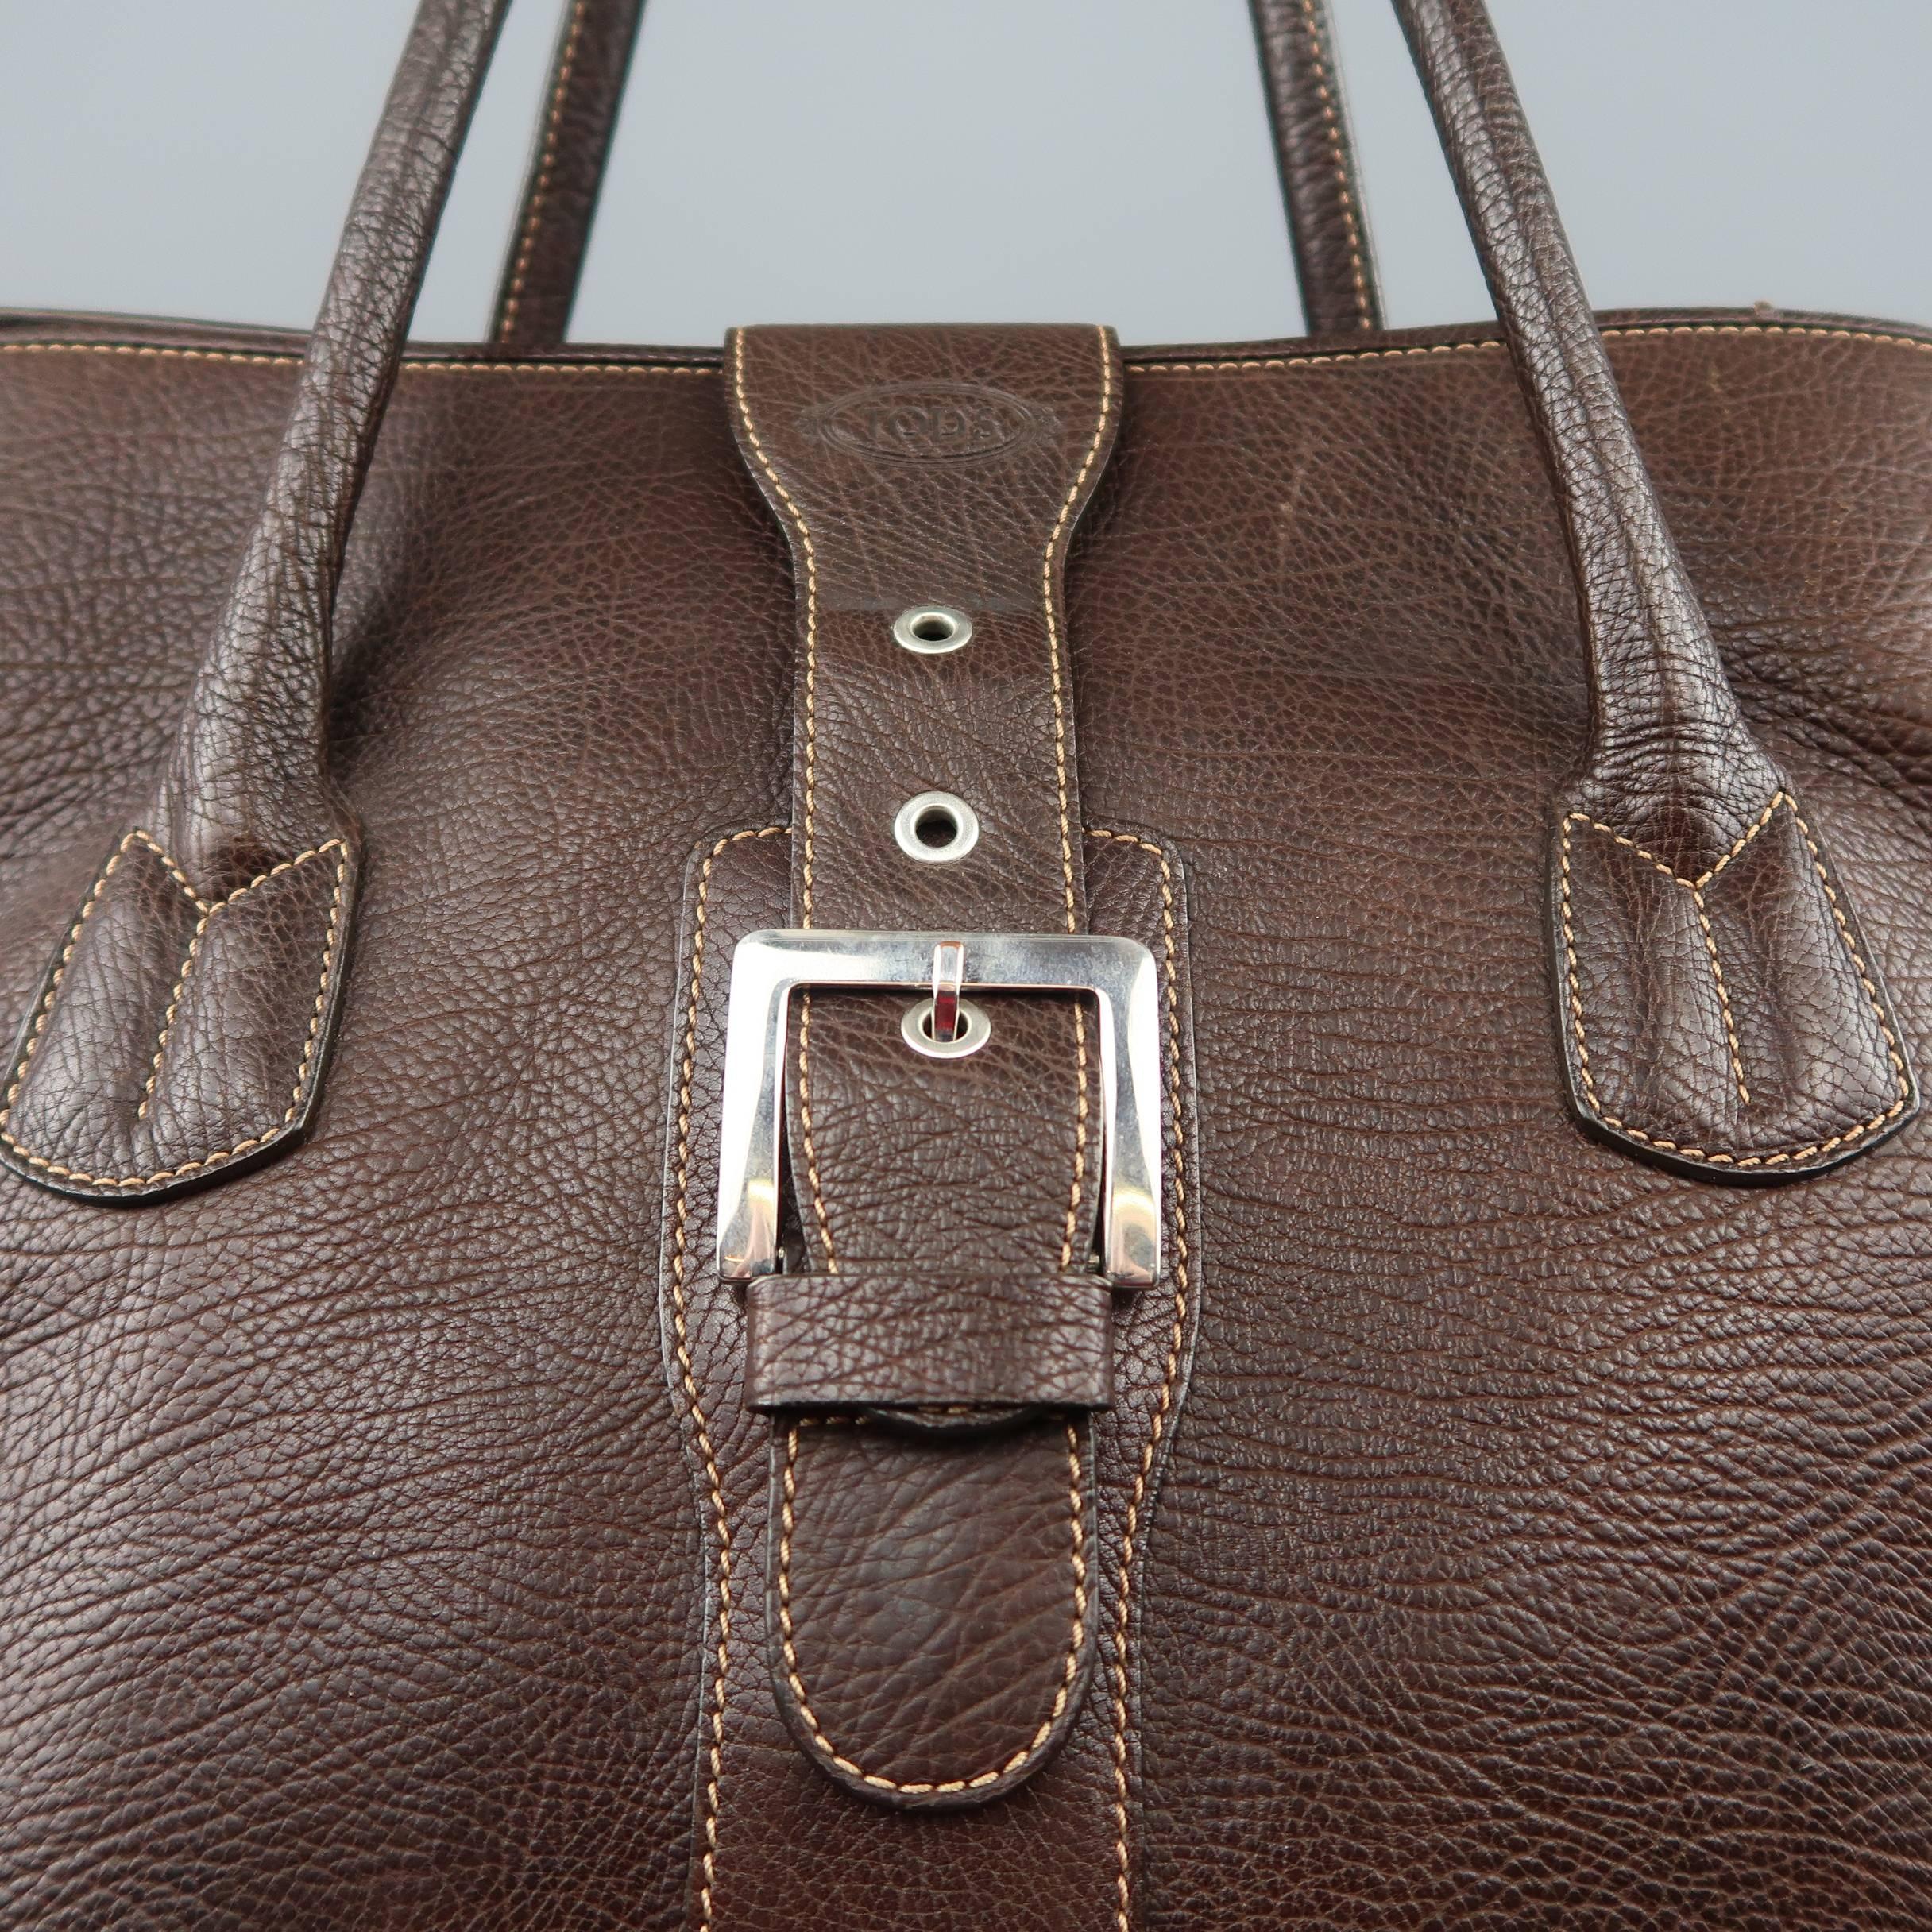 TOD'S weekender tote bag comes brown textured leather with double covered top handles, magnetic belt buckle top strap closure, and contrast stitch details throughout. Wear throughout. As-is.
 
Fair Pre-Owned Condition.
 
Measurements:
 
Length: